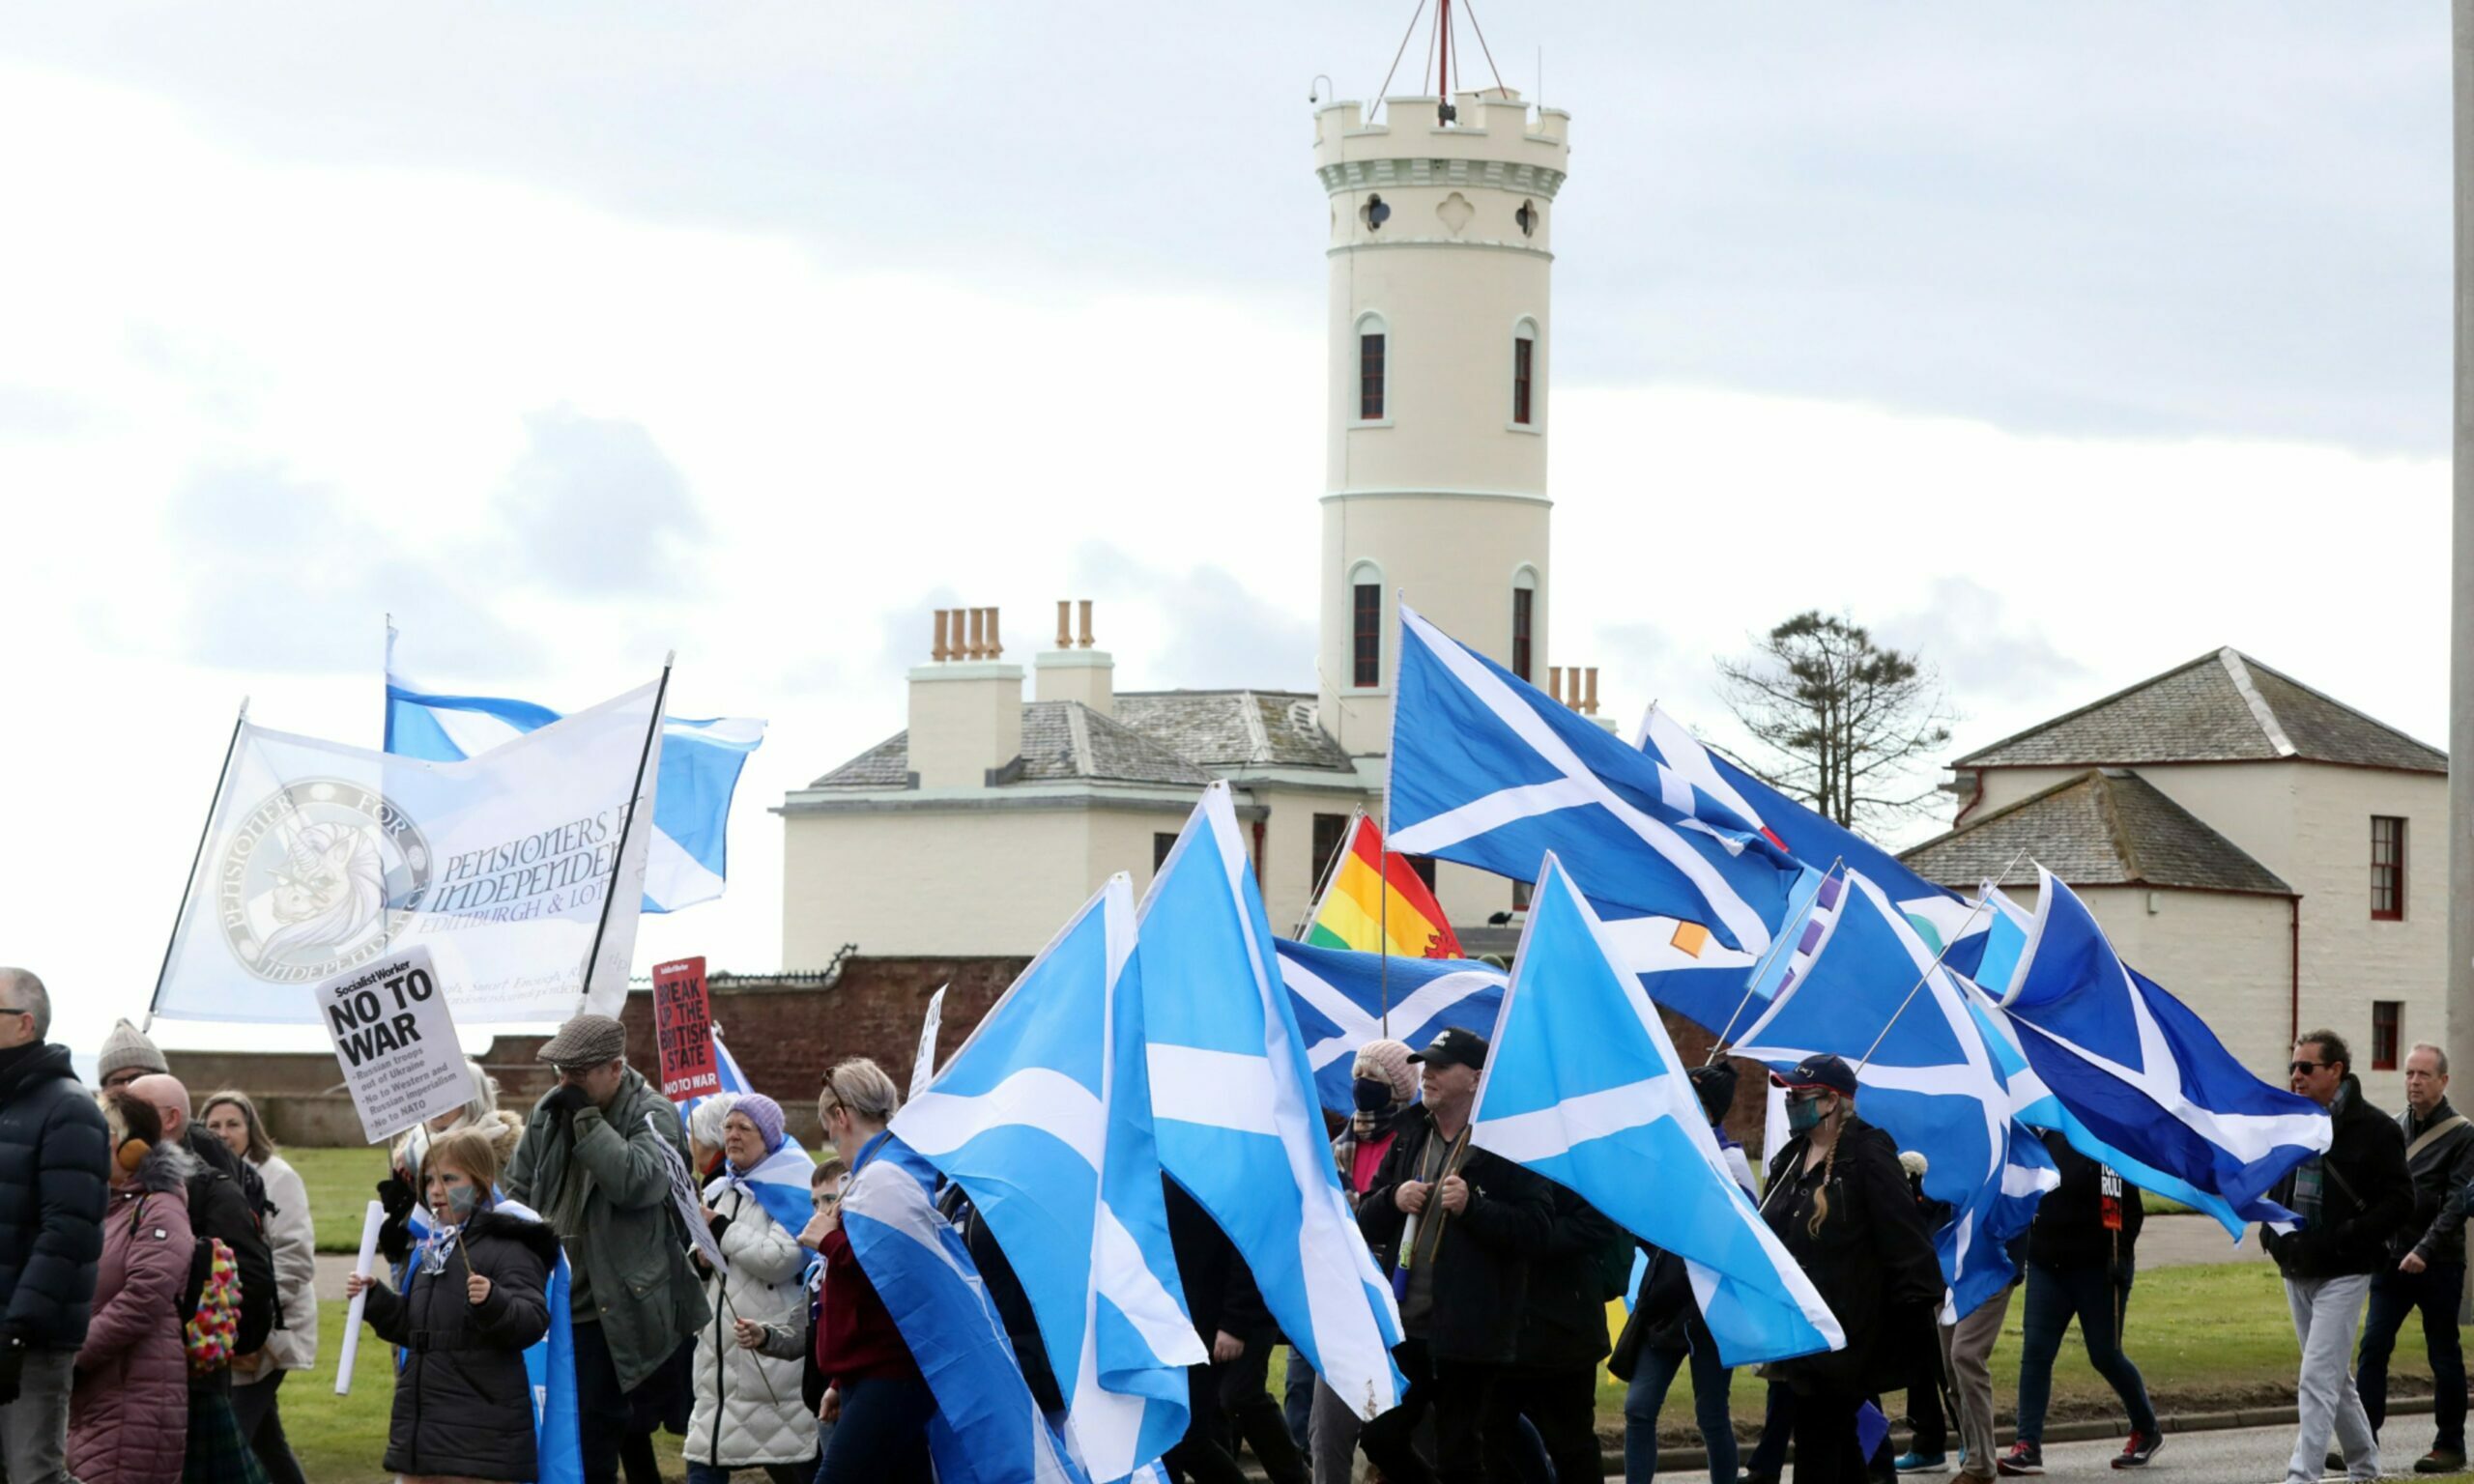 People holding up signs and waving Saltire flags in the air.